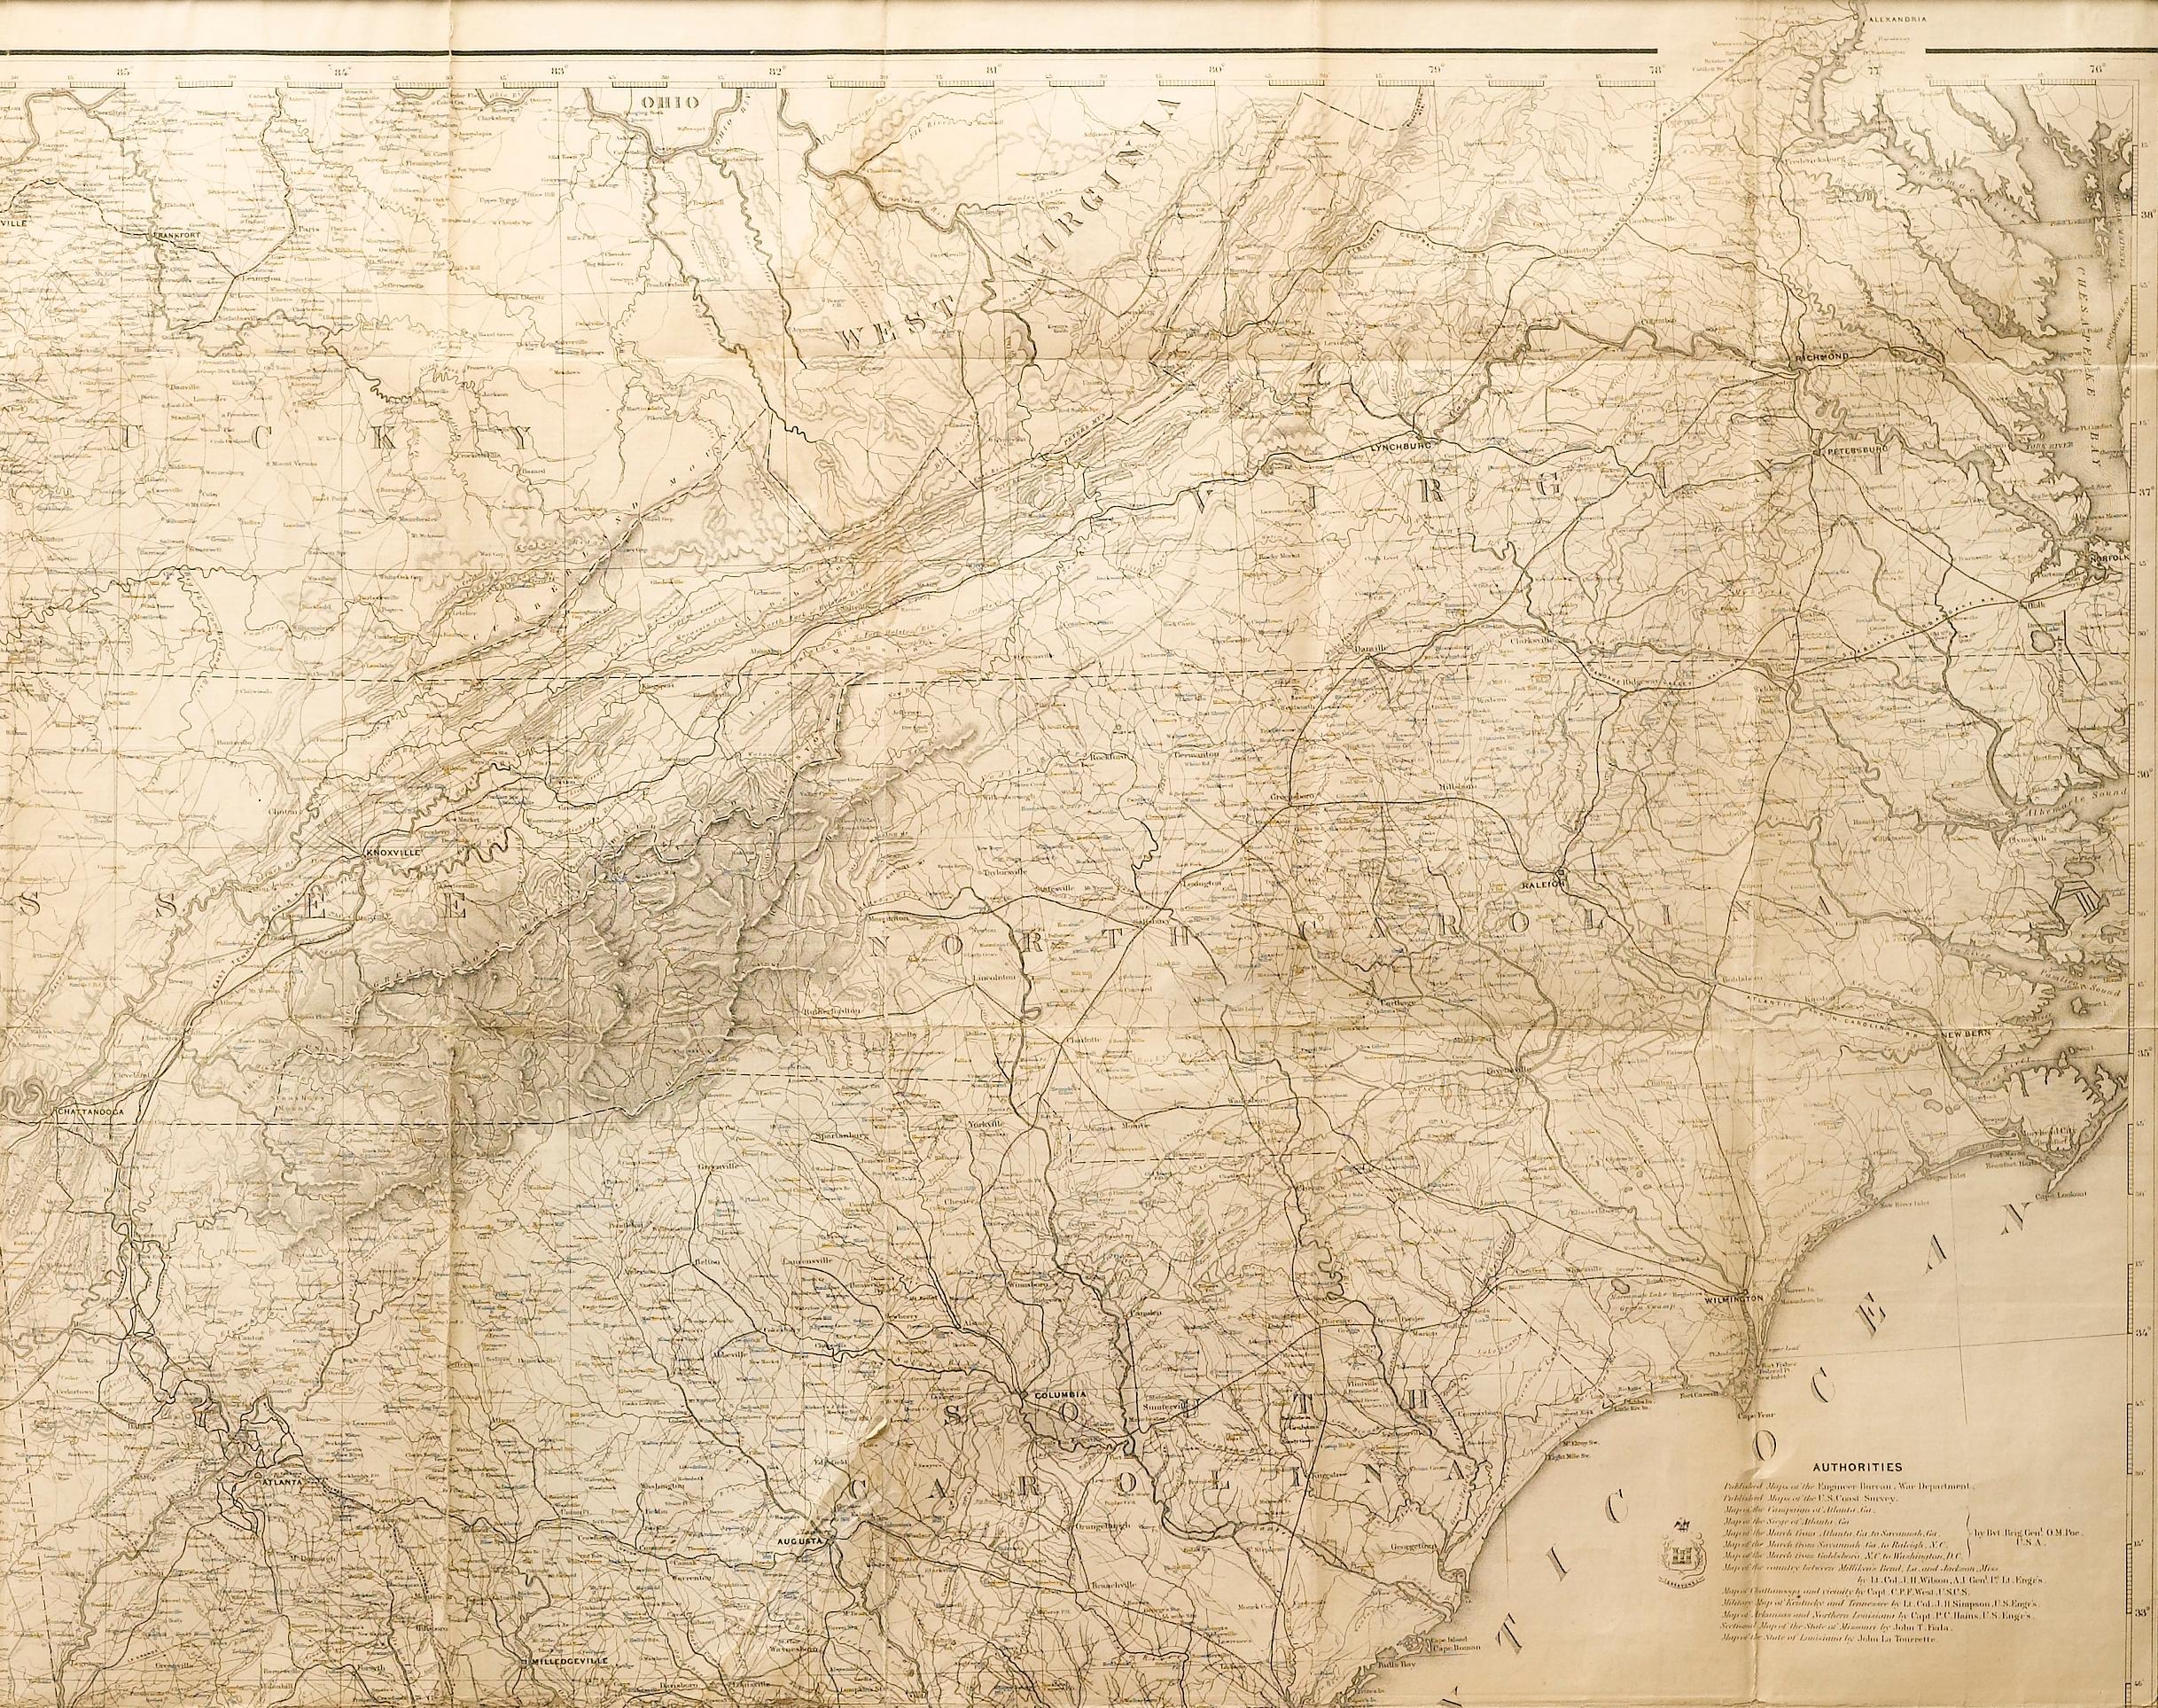 American 1865 Military Map Showing the Marches of the U.S. Forces under W. T. Sherman